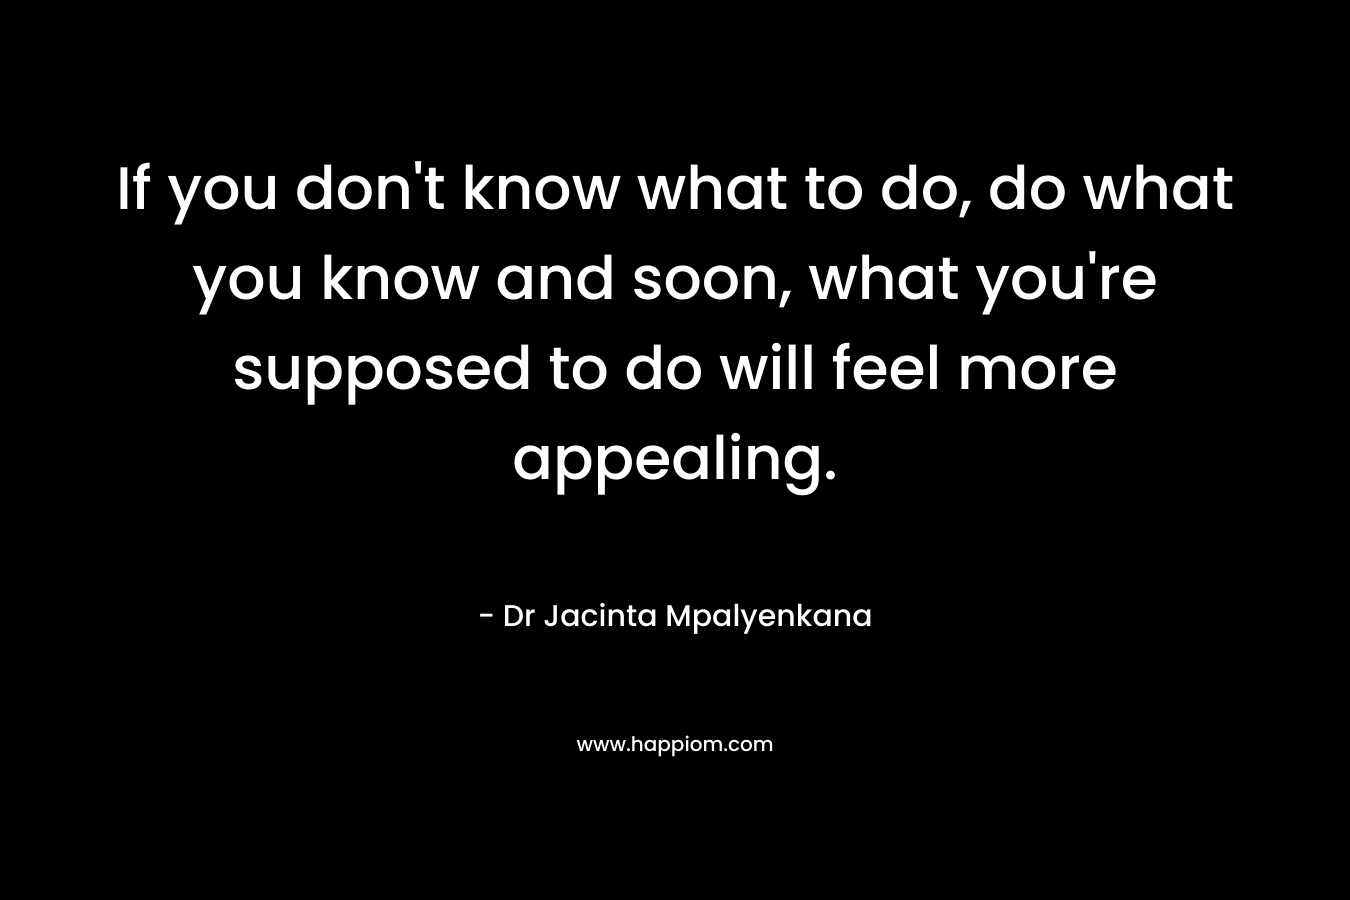 If you don’t know what to do, do what you know and soon, what you’re supposed to do will feel more appealing. – Dr Jacinta Mpalyenkana